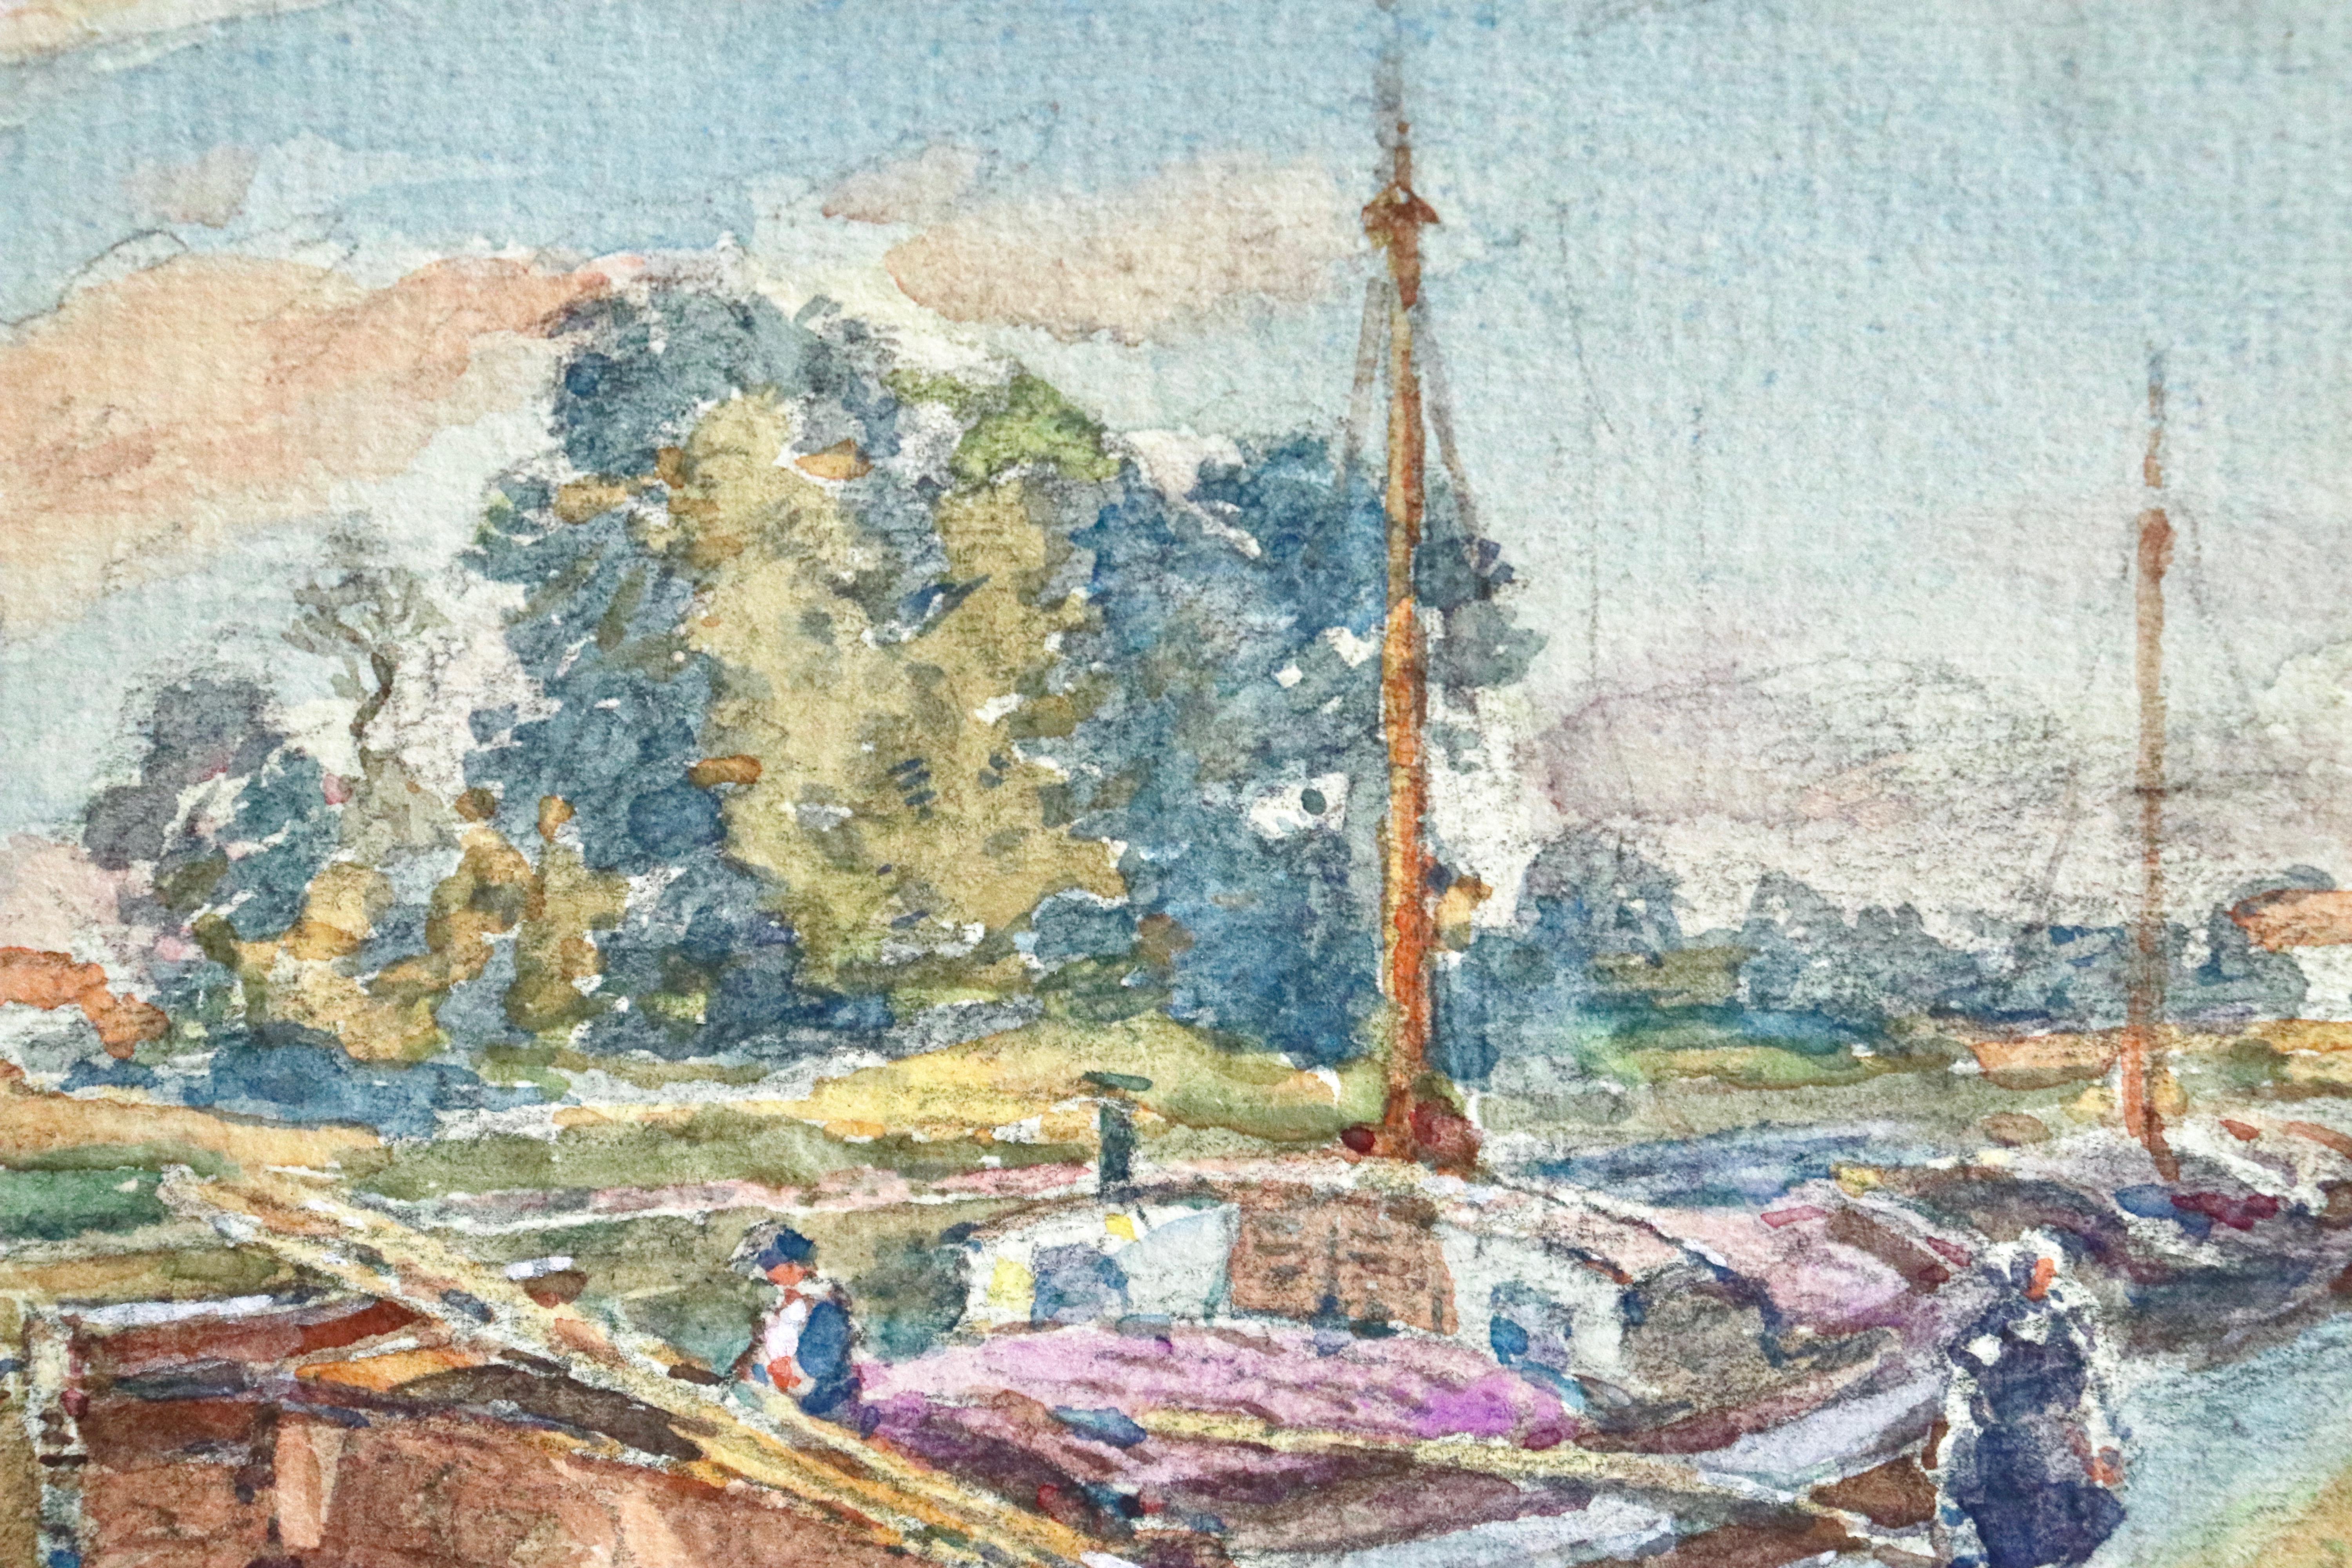 Watercolour on paper circa 1907 by Henri Duhem depicting boats moored on the canal in Douai. Signed lower right. This painting is not currently framed but a suitable frame can be sourced if required.

Descendant of an old Flemish family, Henri Duhem